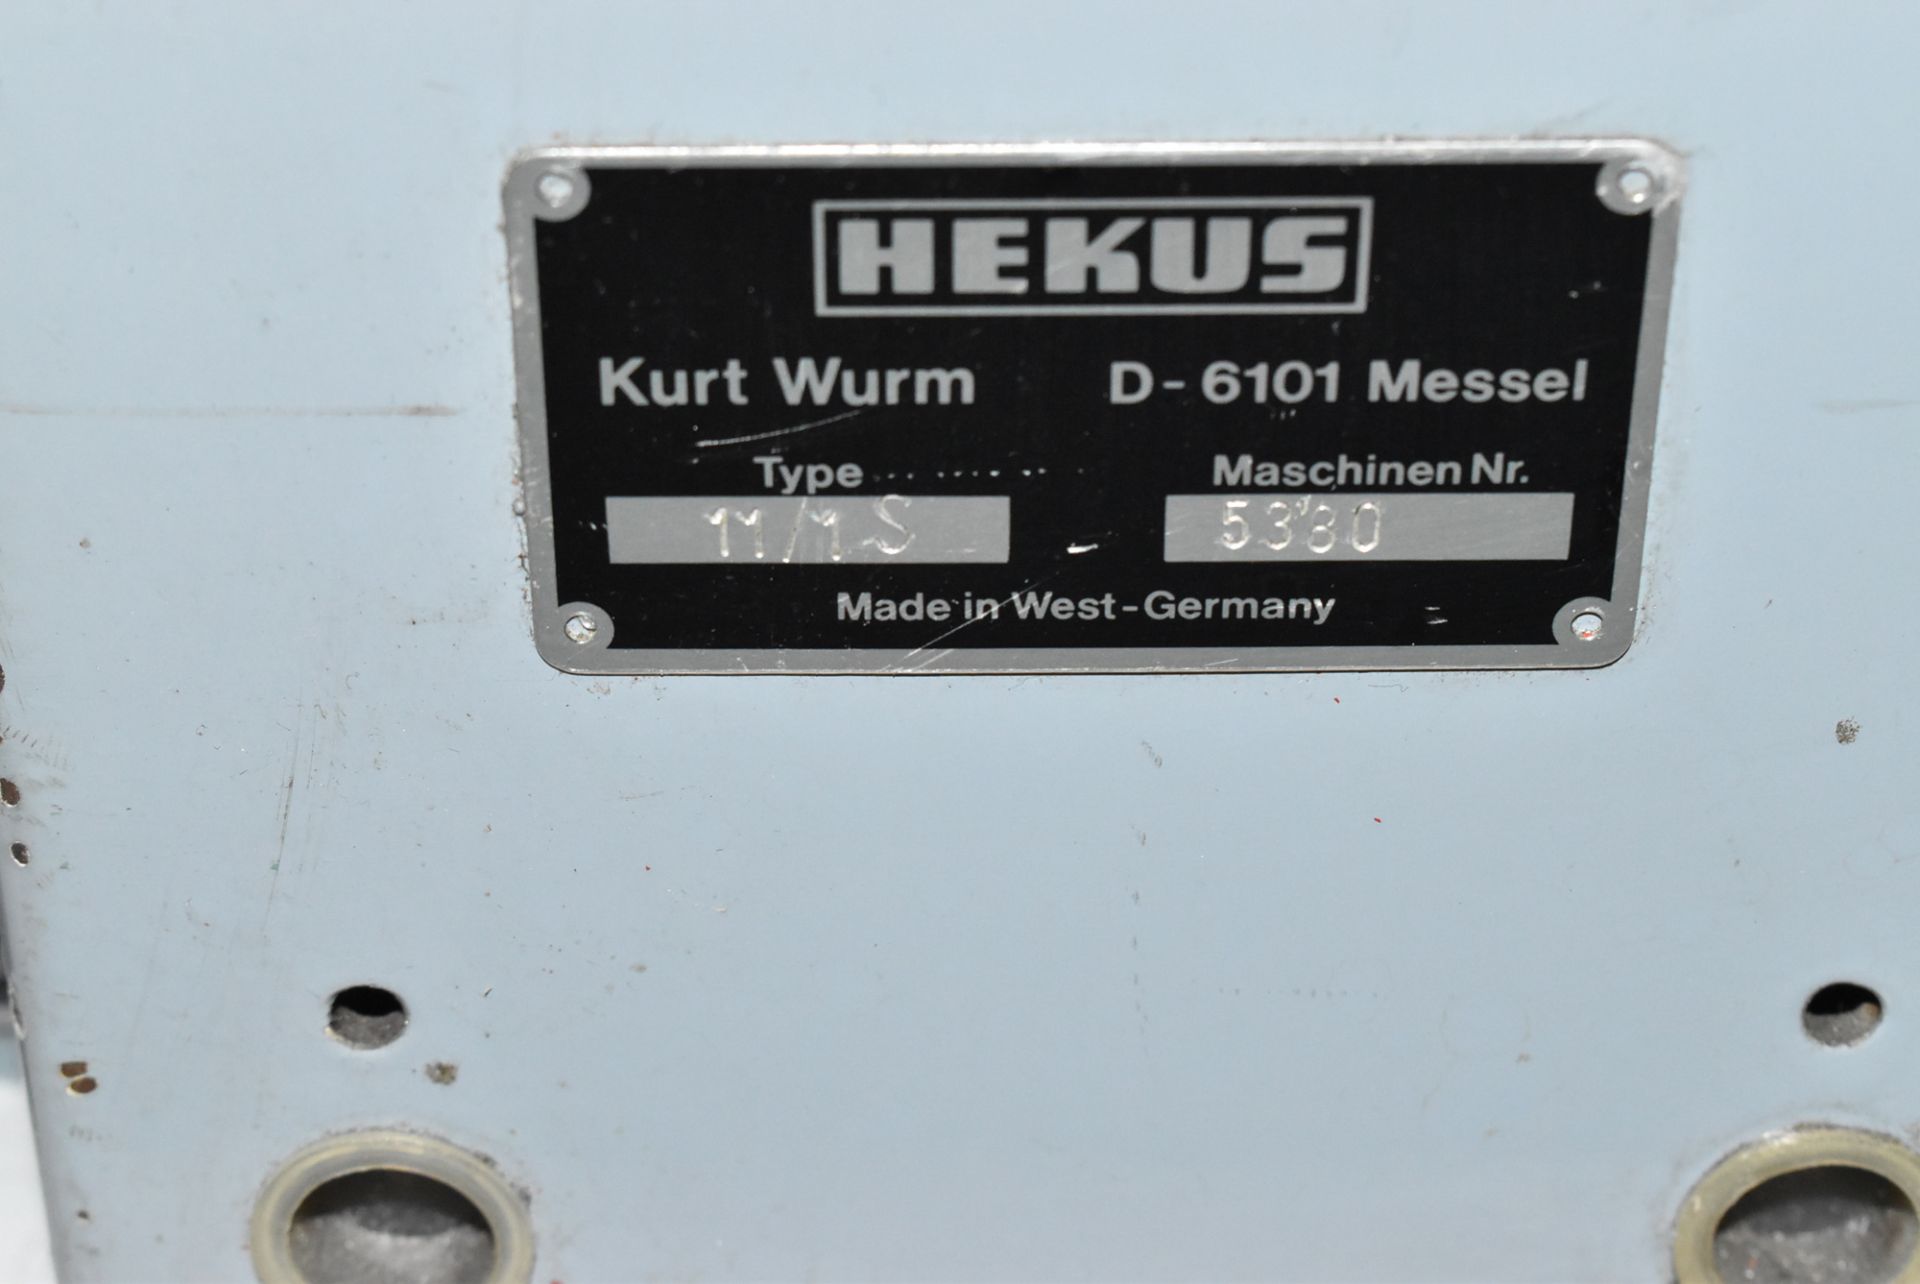 HEKUS 11/1S BENCH TYPE PRESS WITH 600 MM X 550 MM TABLE, S/N 5380 (BAU 13) [Removal Fee = € 27. - Bild 3 aus 4